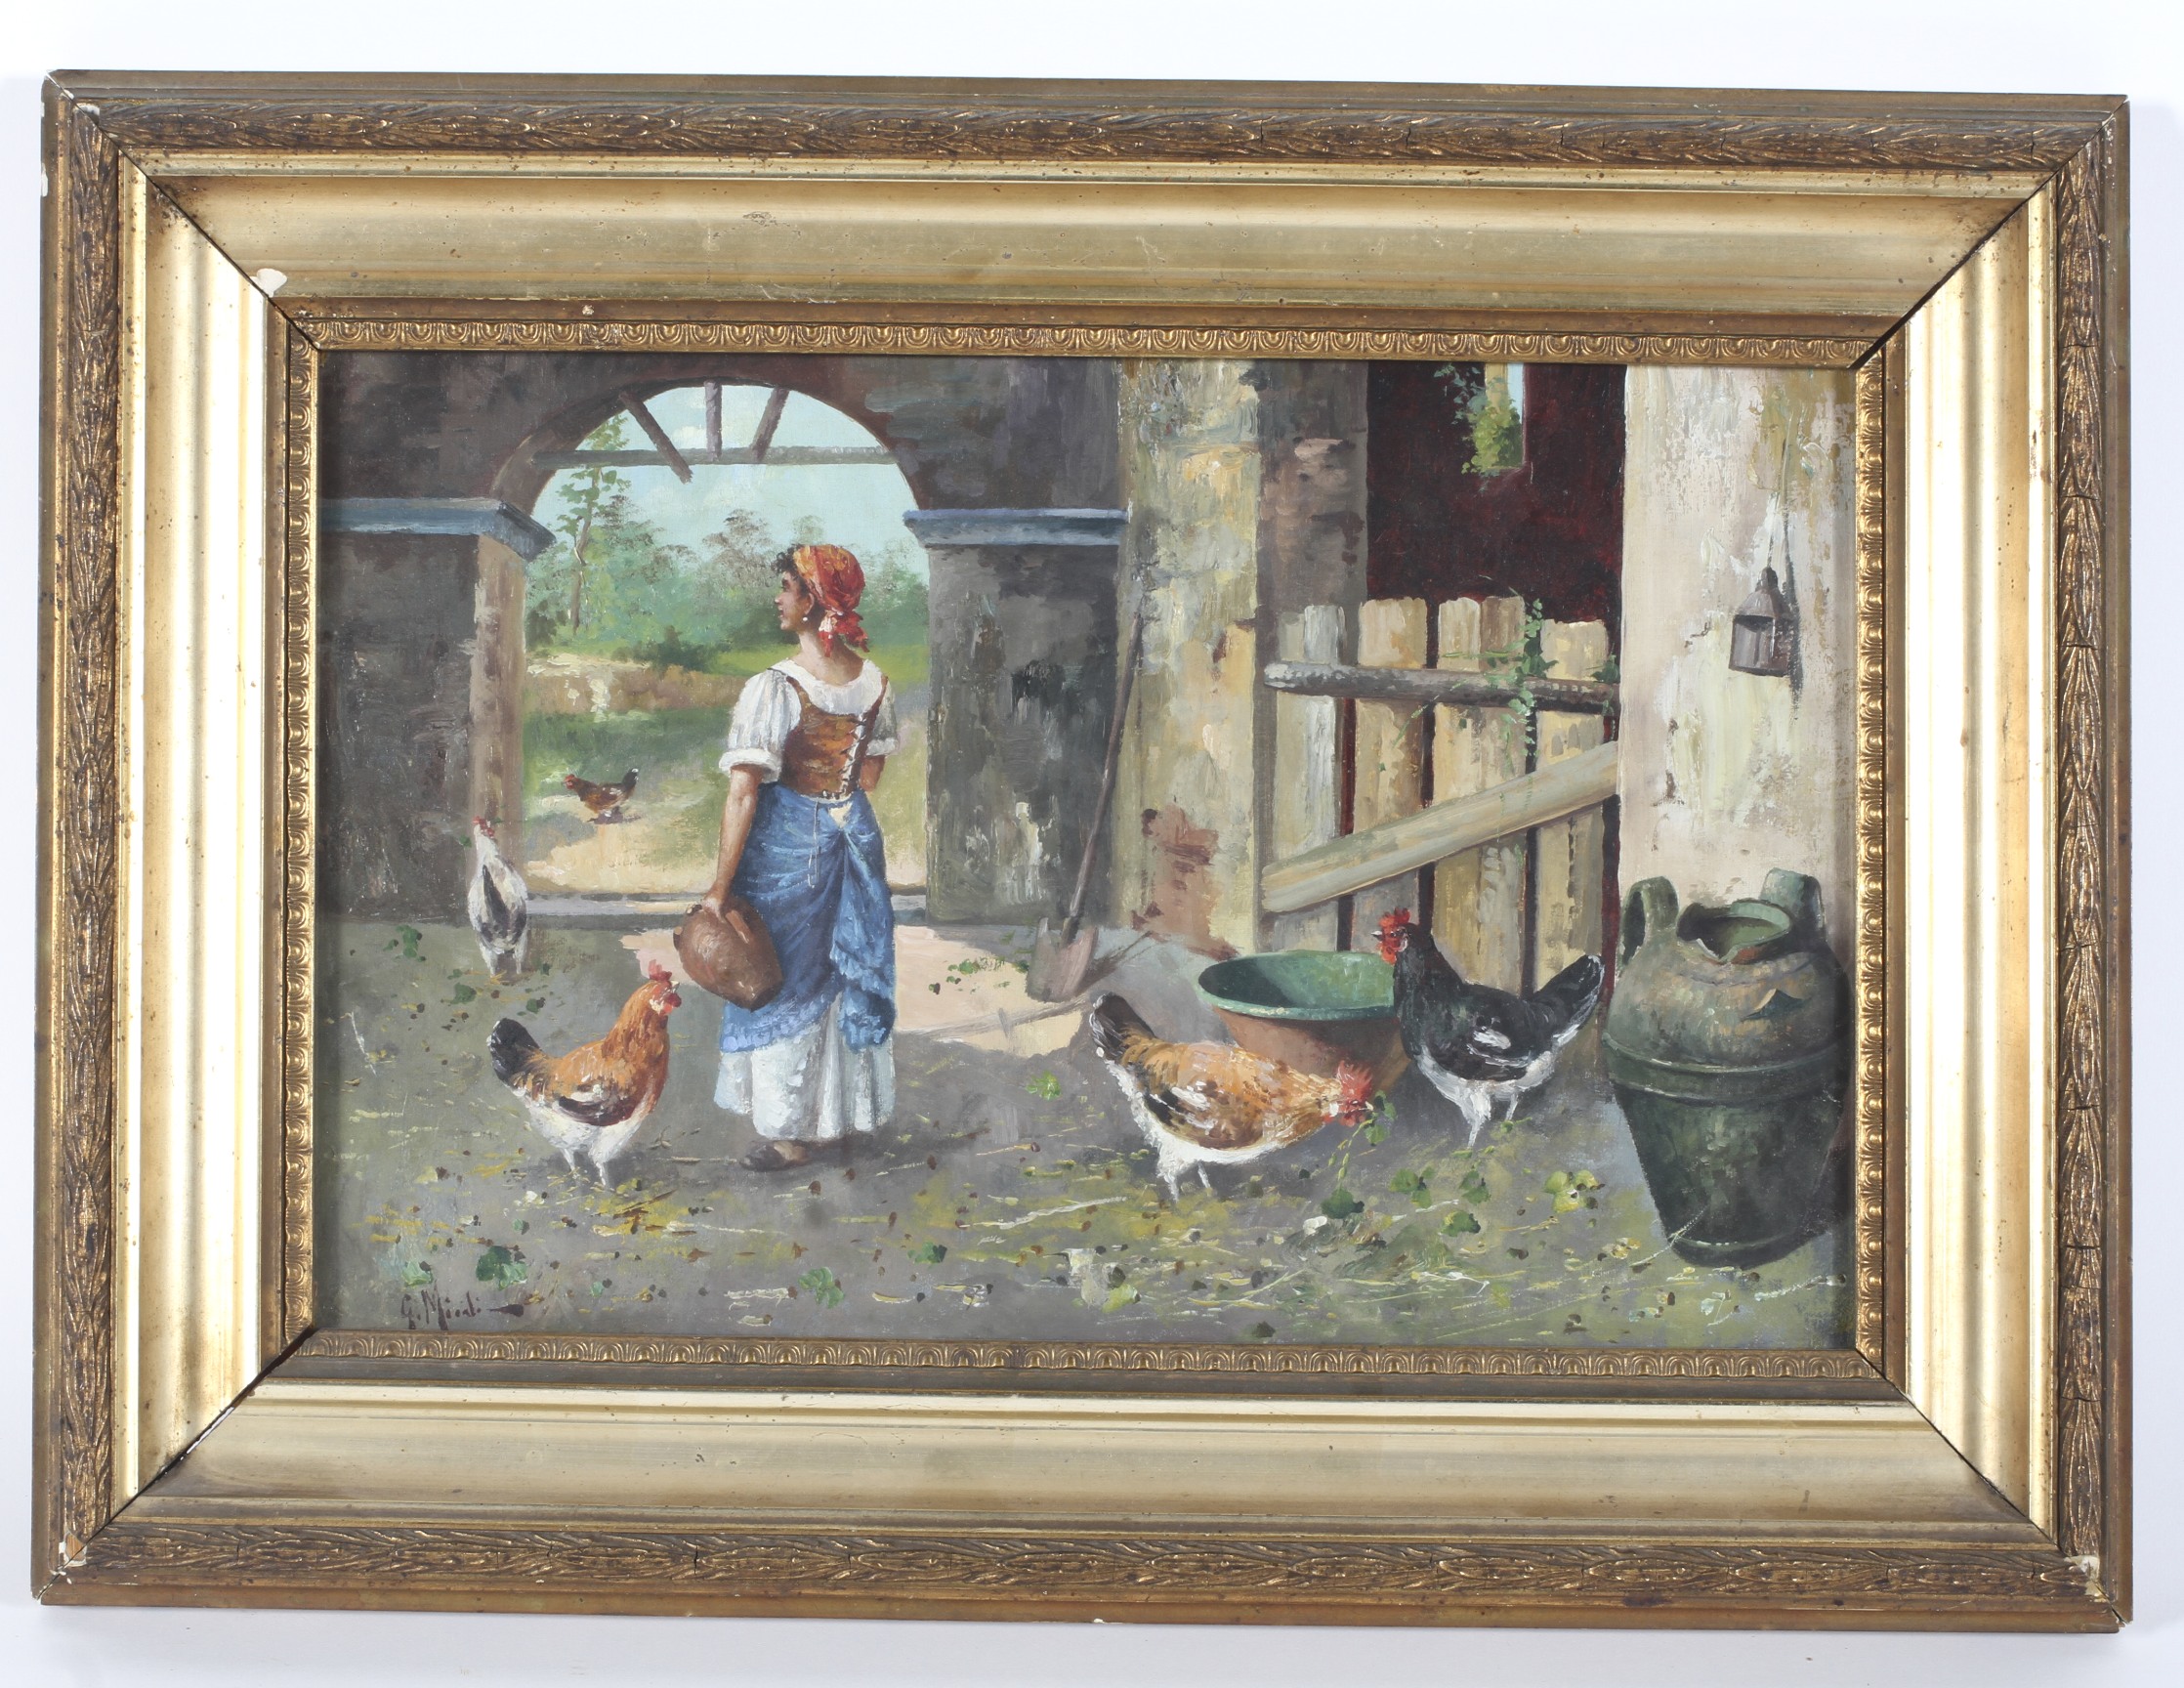 Late 19th/Early 20th Century Continental School, Farm Girl Feeding Chickens in a Barn, - Image 2 of 4